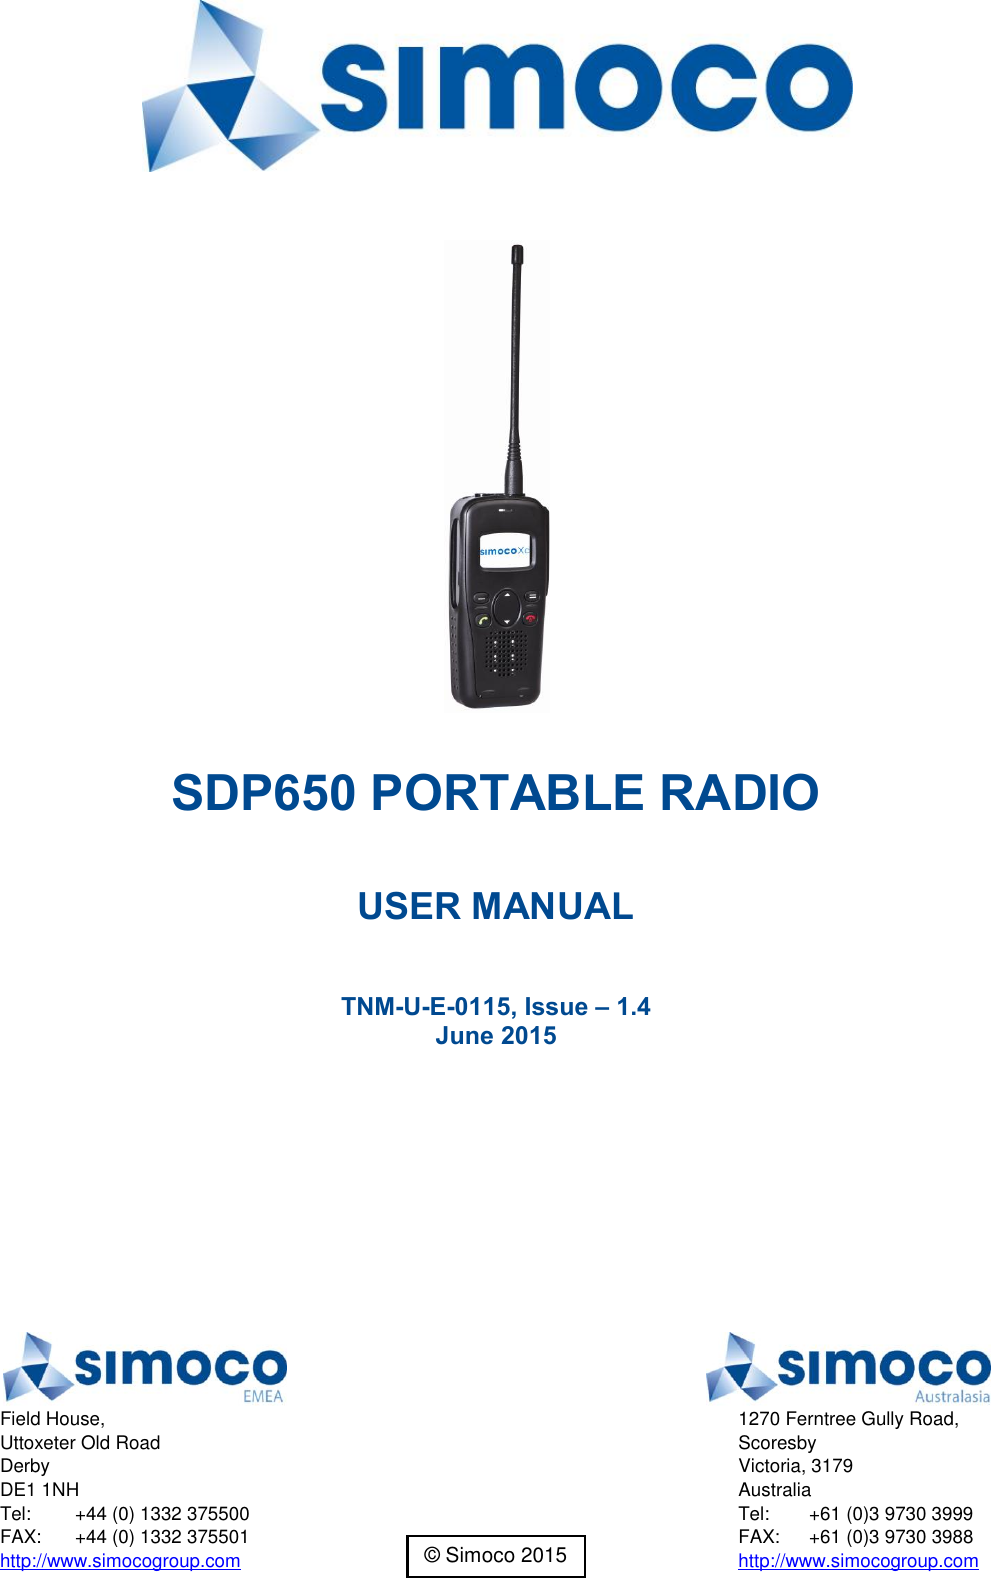    SDP650 PORTABLE RADIO  USER MANUAL  TNM-U-E-0115, Issue – 1.4 June 2015    Field House, Uttoxeter Old Road Derby DE1 1NH Tel:  +44 (0) 1332 375500 FAX:  +44 (0) 1332 375501 http://www.simocogroup.com  1270 Ferntree Gully Road, Scoresby Victoria, 3179 Australia Tel:  +61 (0)3 9730 3999 FAX:  +61 (0)3 9730 3988 http://www.simocogroup.com © Simoco 2015 